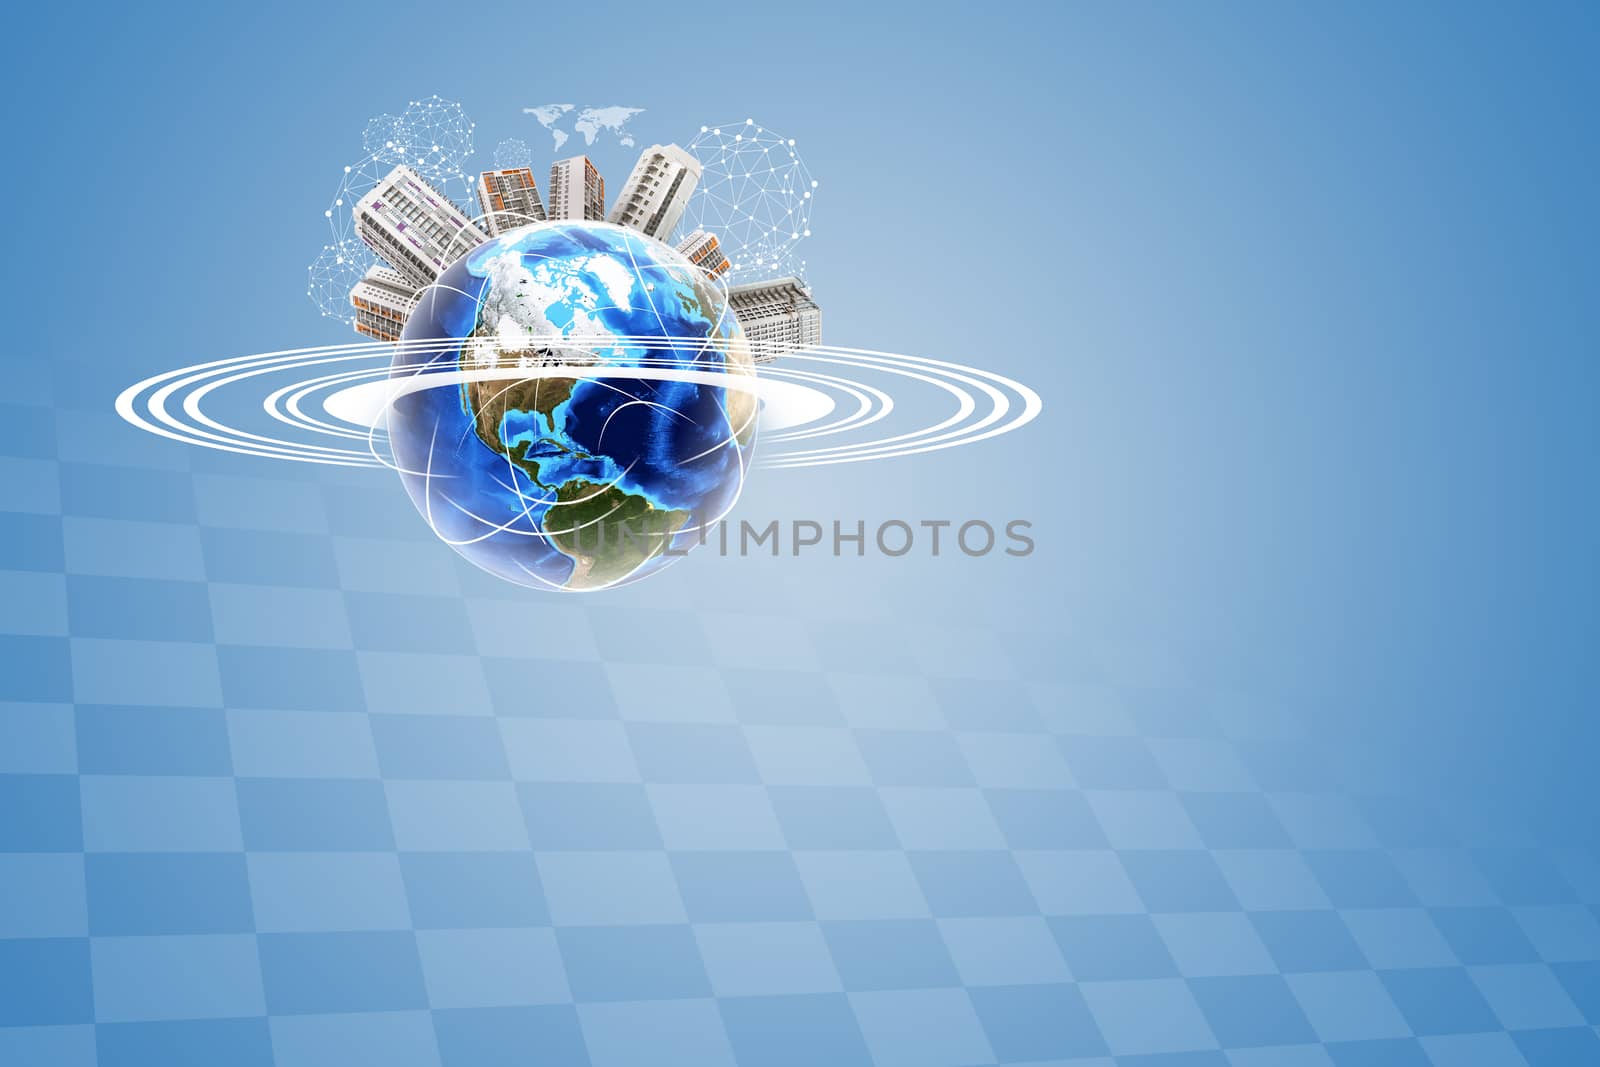 Earth with buildings and wire-frame spheres on blue background by cherezoff